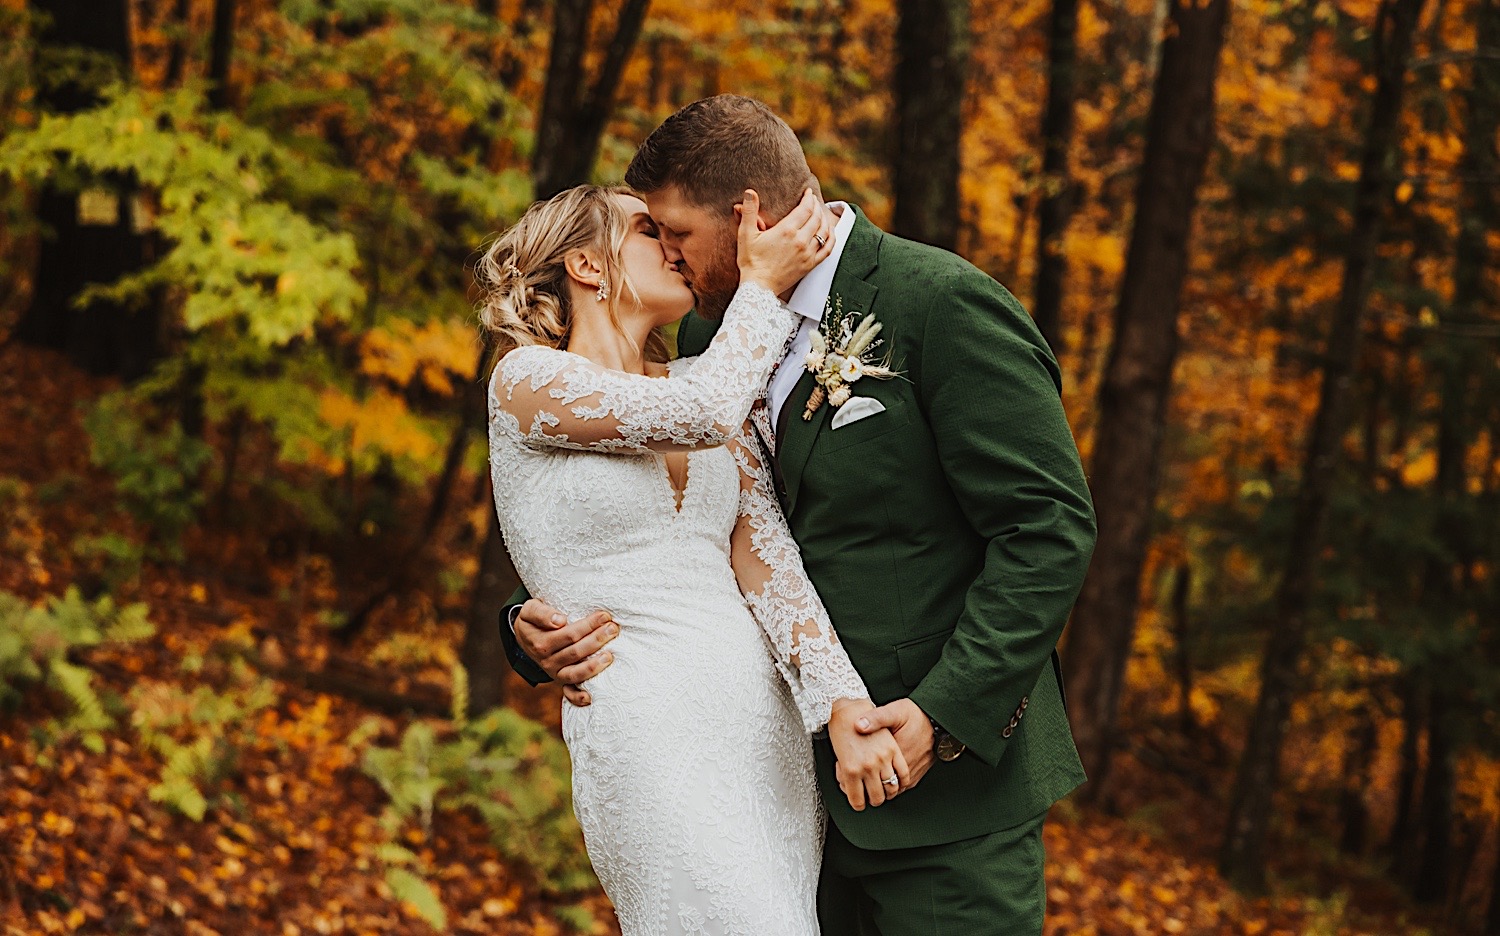 A bride and groom kiss one another while in front of a forest, it is the fall so the leaves are different shades of yellow